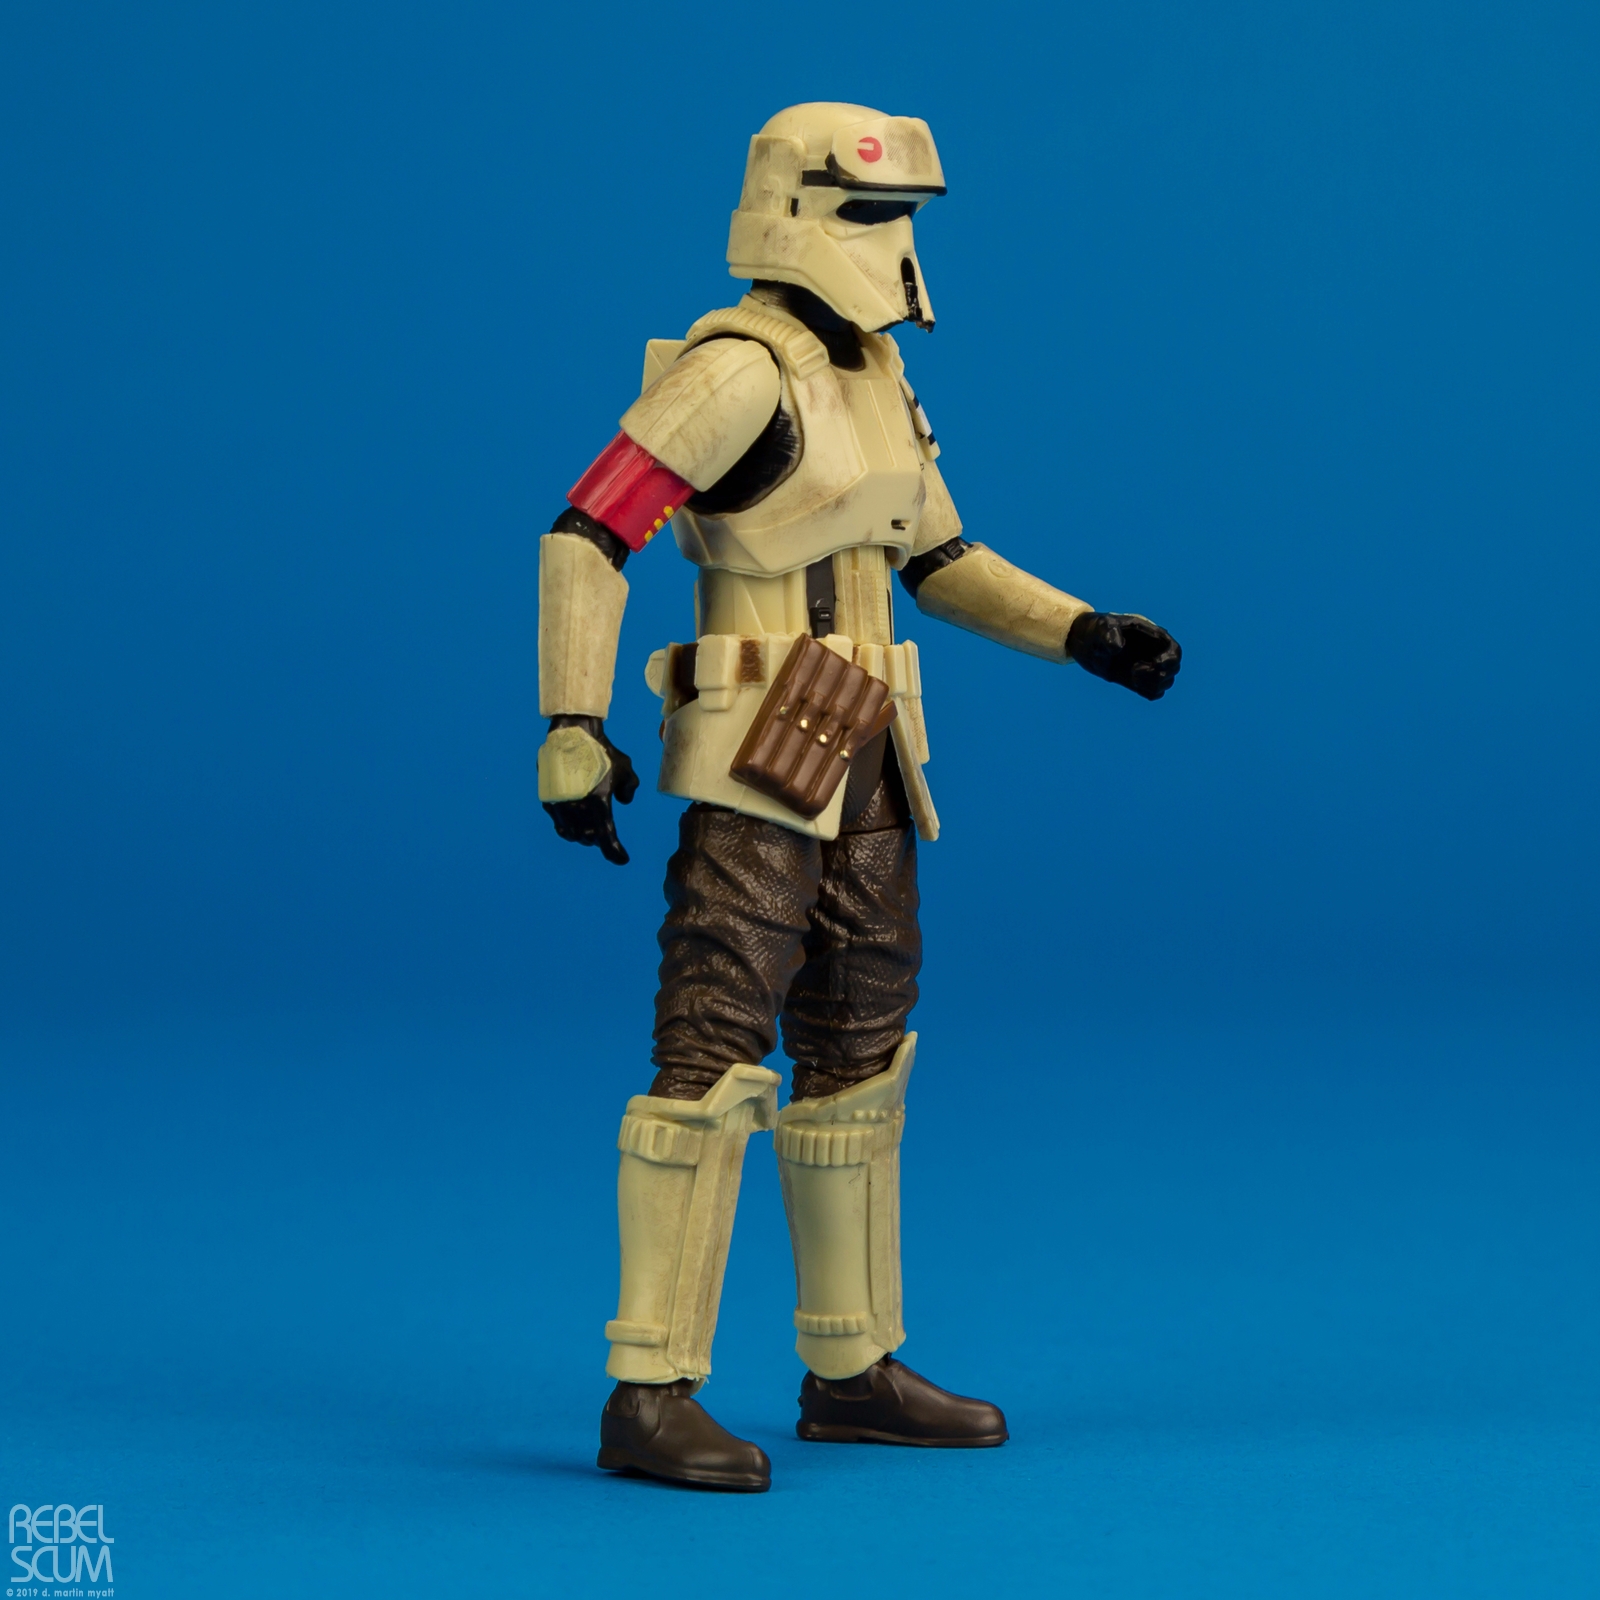 VC133-Scarif-Stormtrooper-The-Vintage-Collection-Hasbro-002.jpg